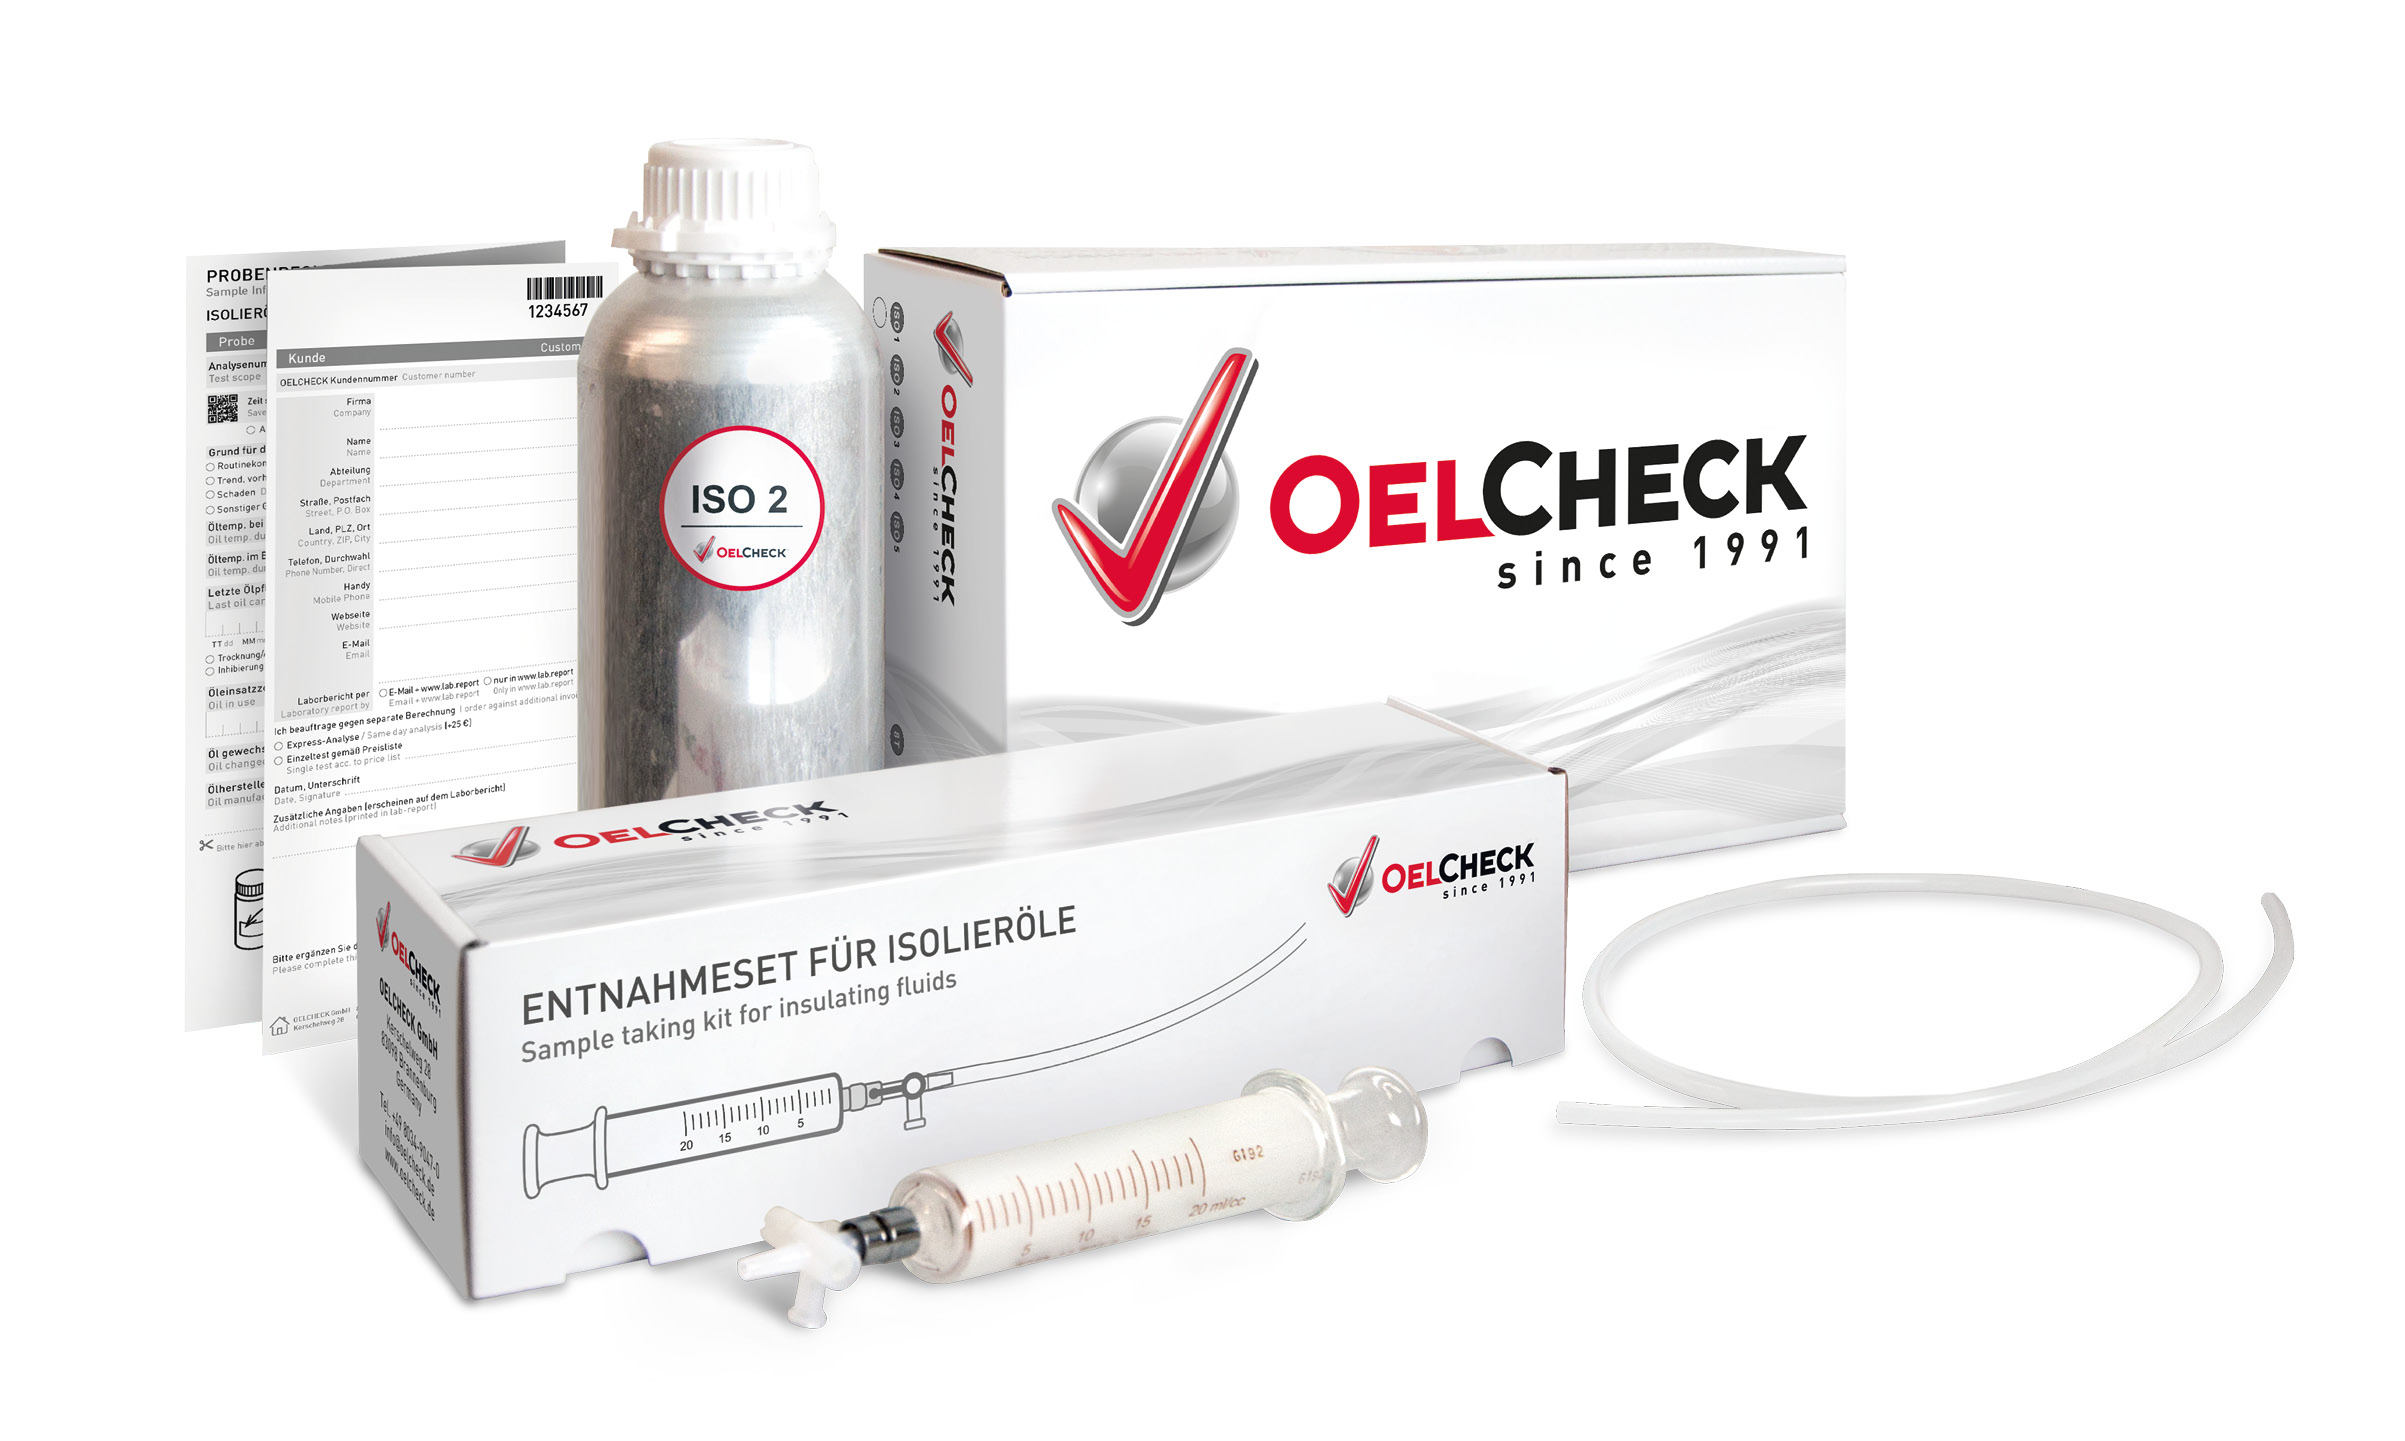 OELCHECK all-inclusive analysis kit for insulating and transformer oils